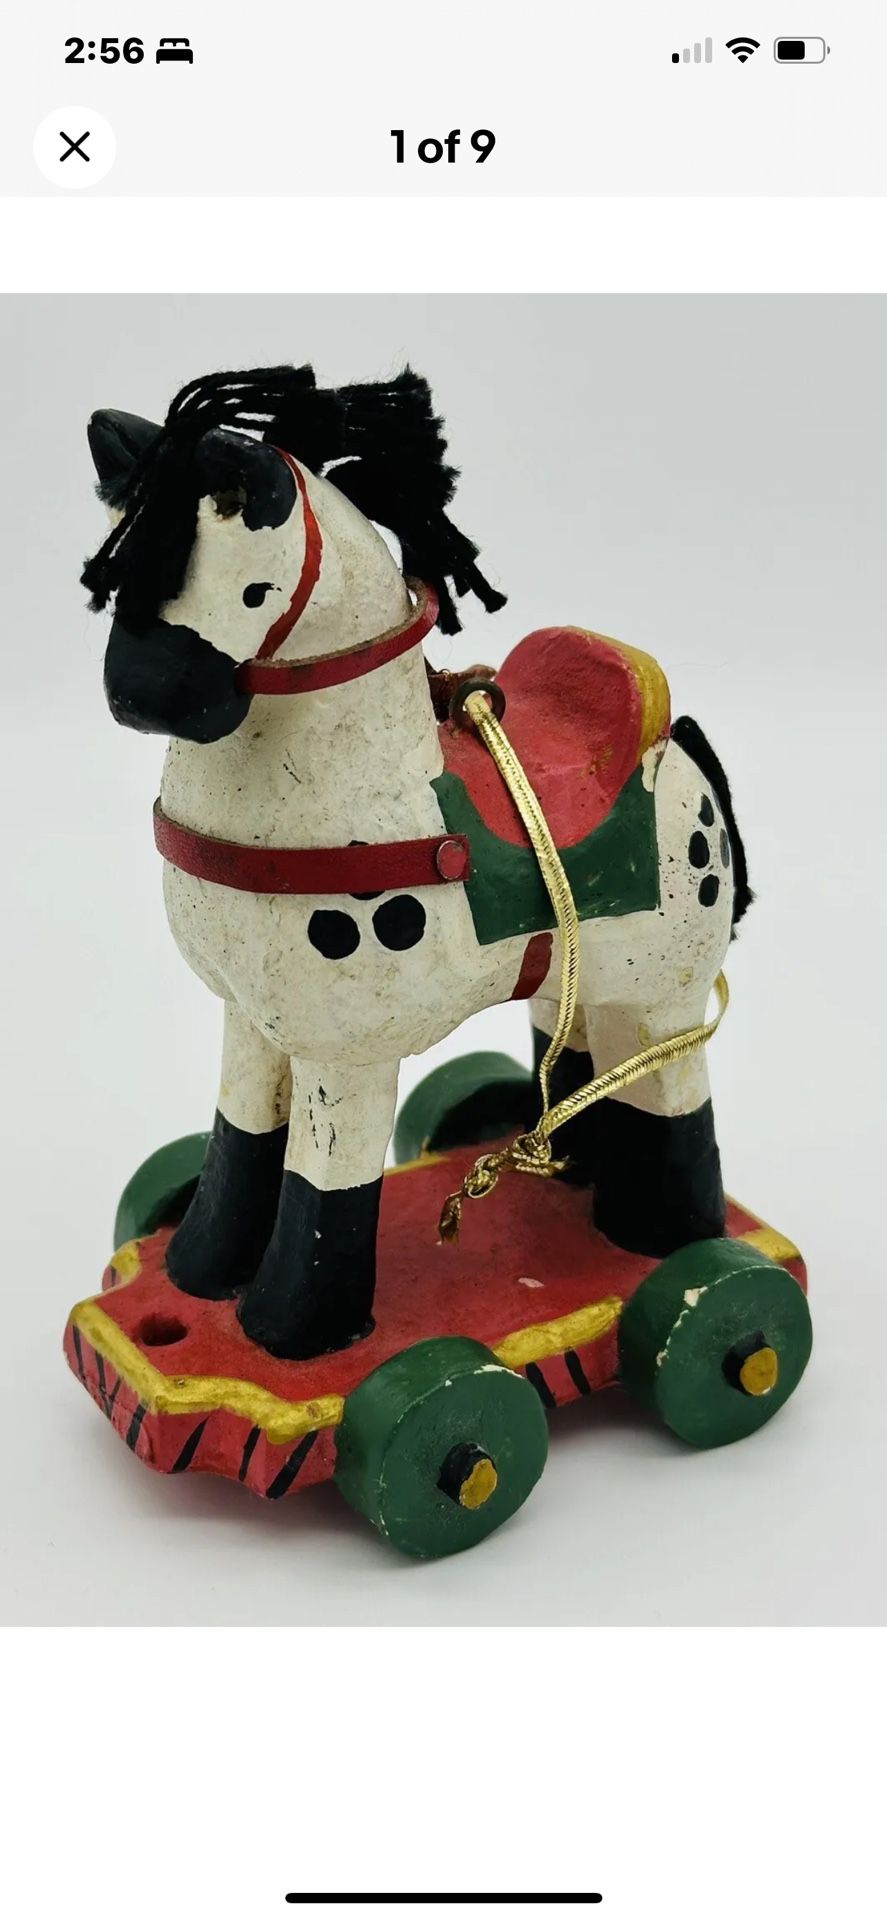 RARE House of Hatten 1994 Twas The Night Before Christmas Toy Horse Ornament